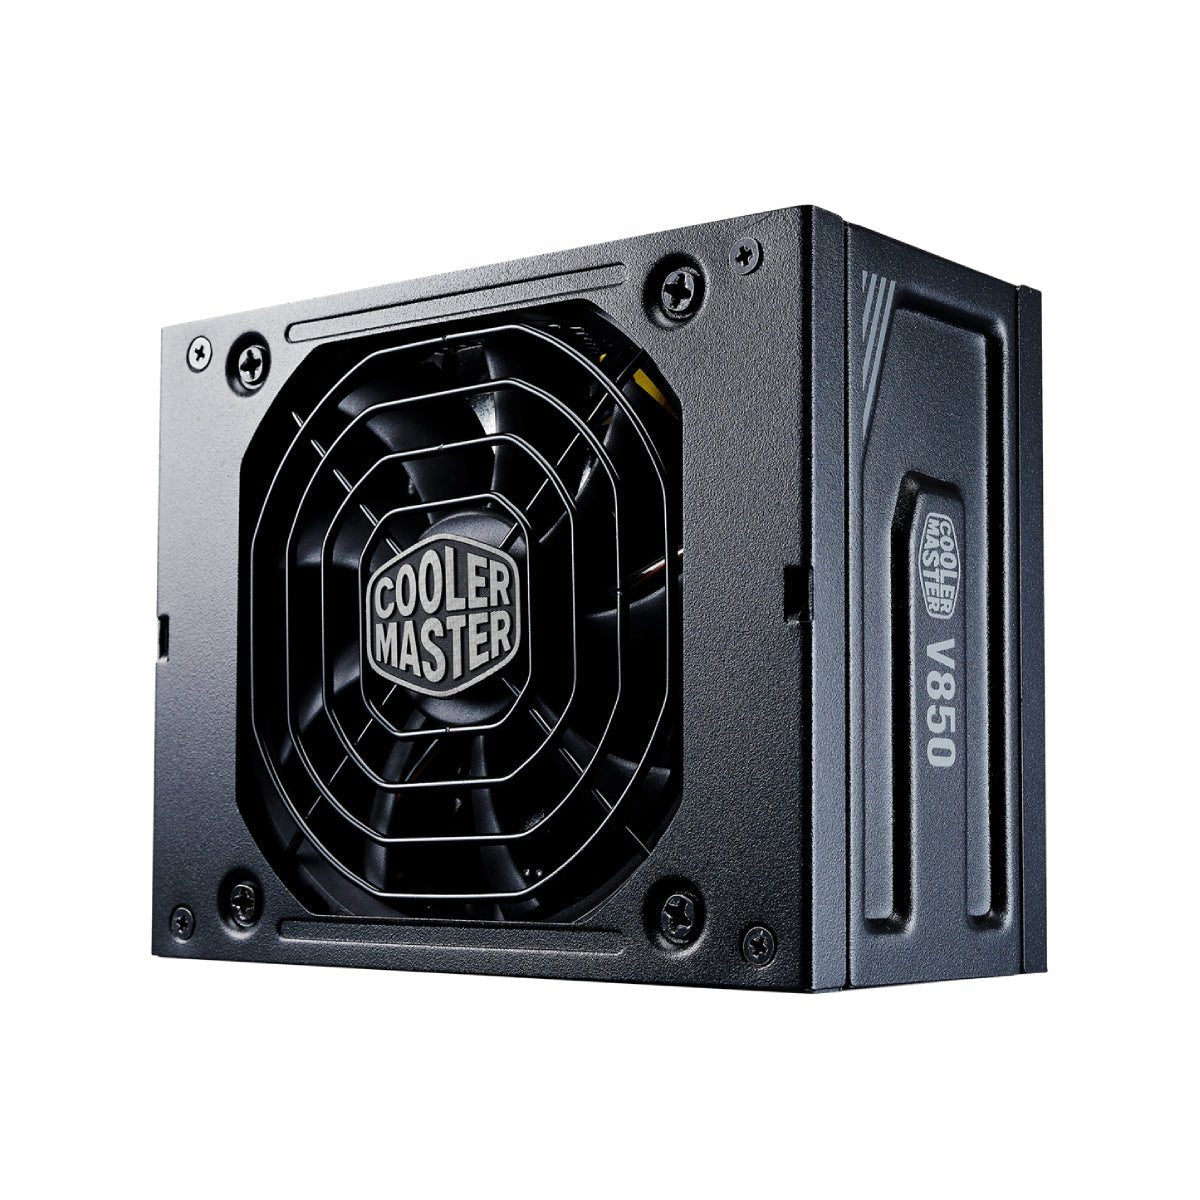 (Pre-Owned) Cooler Master V850 Gold SFX Fully Modular Power Supply - مزود طاقة مستعمل - Store 974 | ستور ٩٧٤